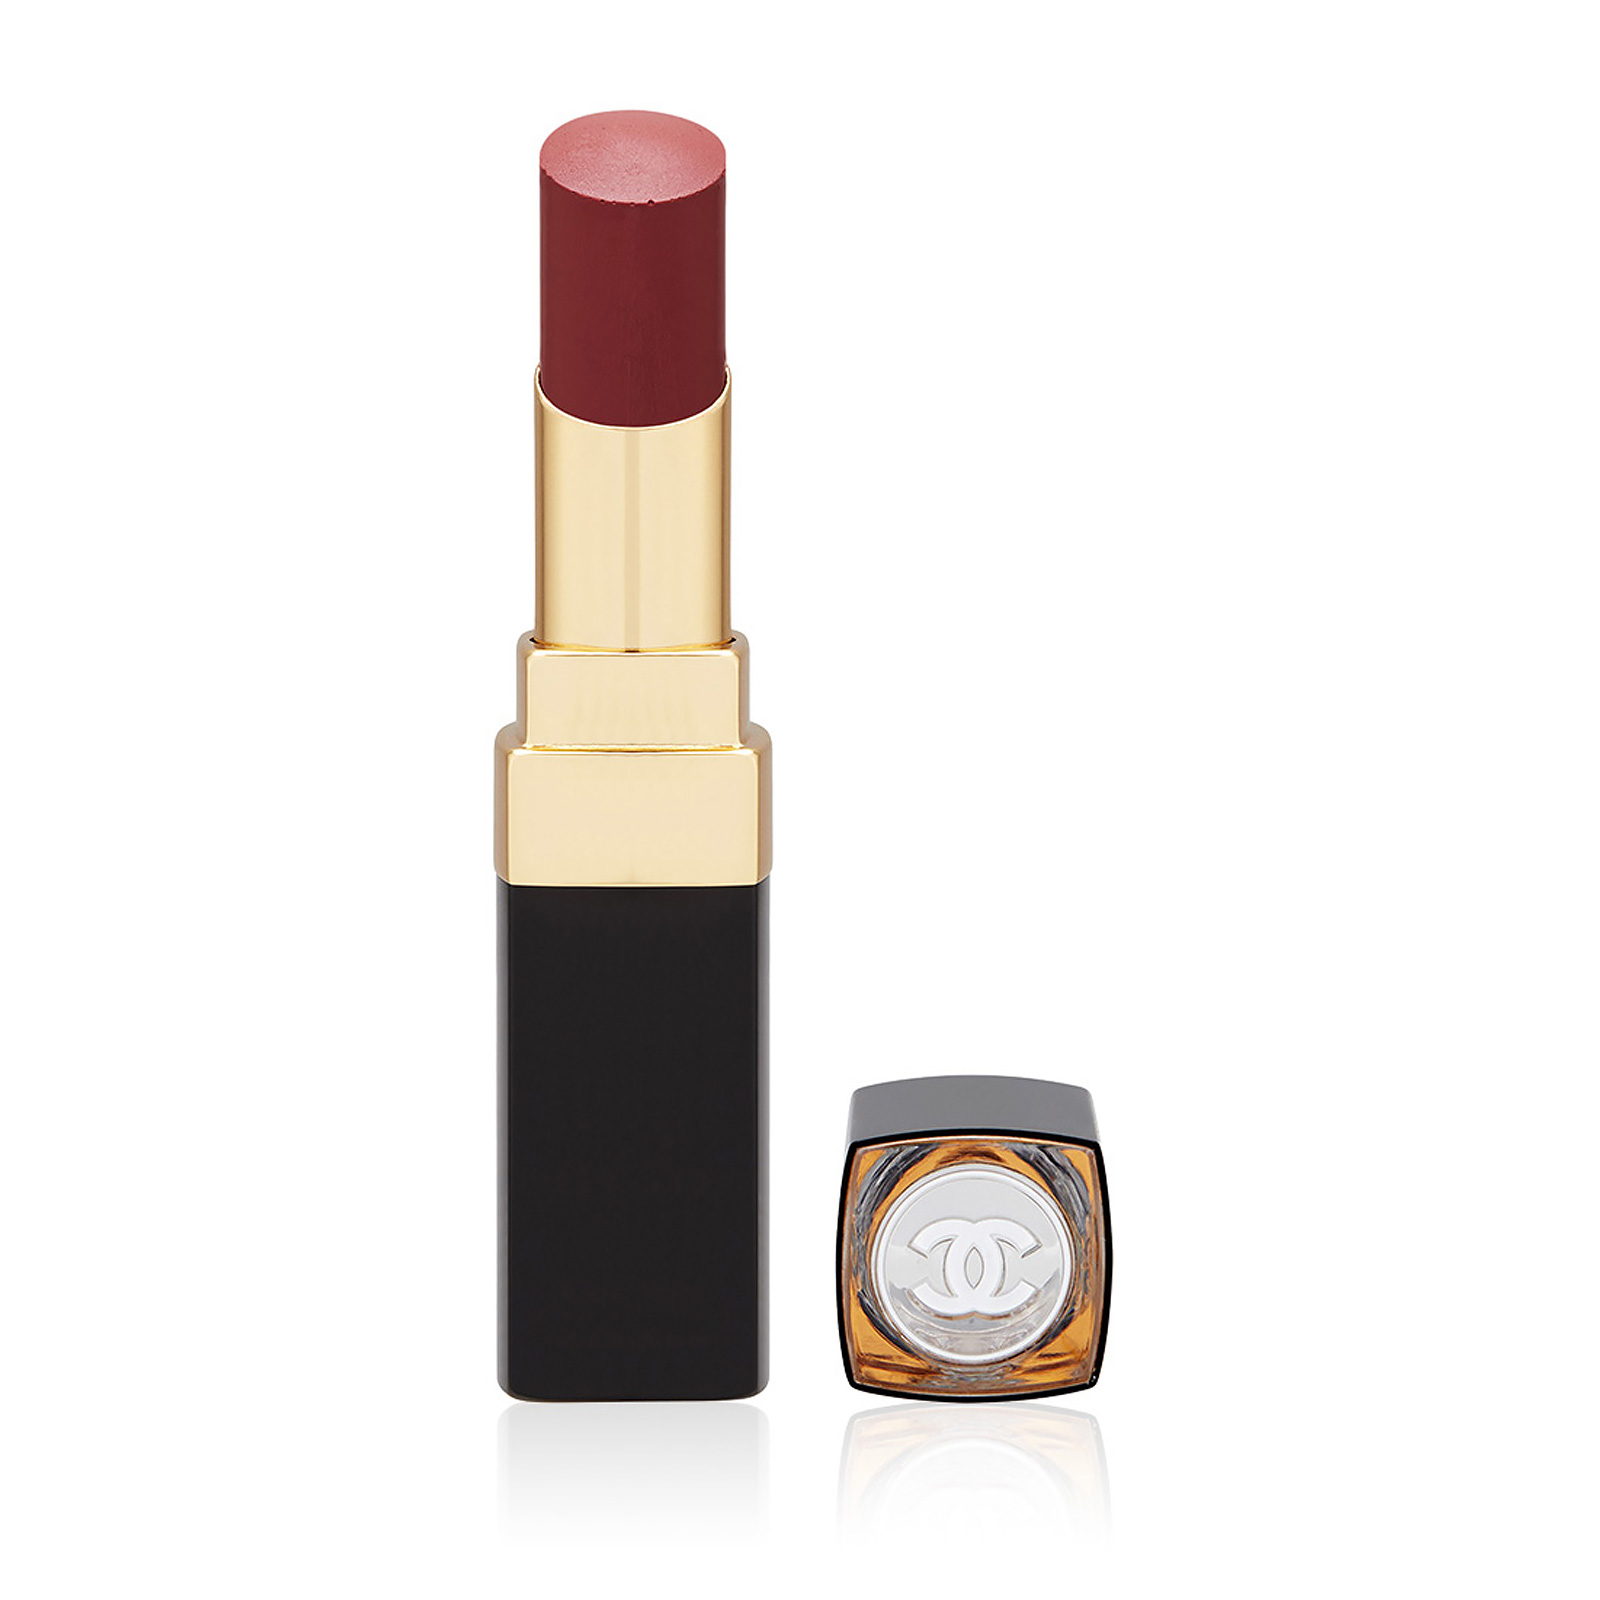 Luxury Makeup Review: Chanel Rouge Coco Stylo Lipstick